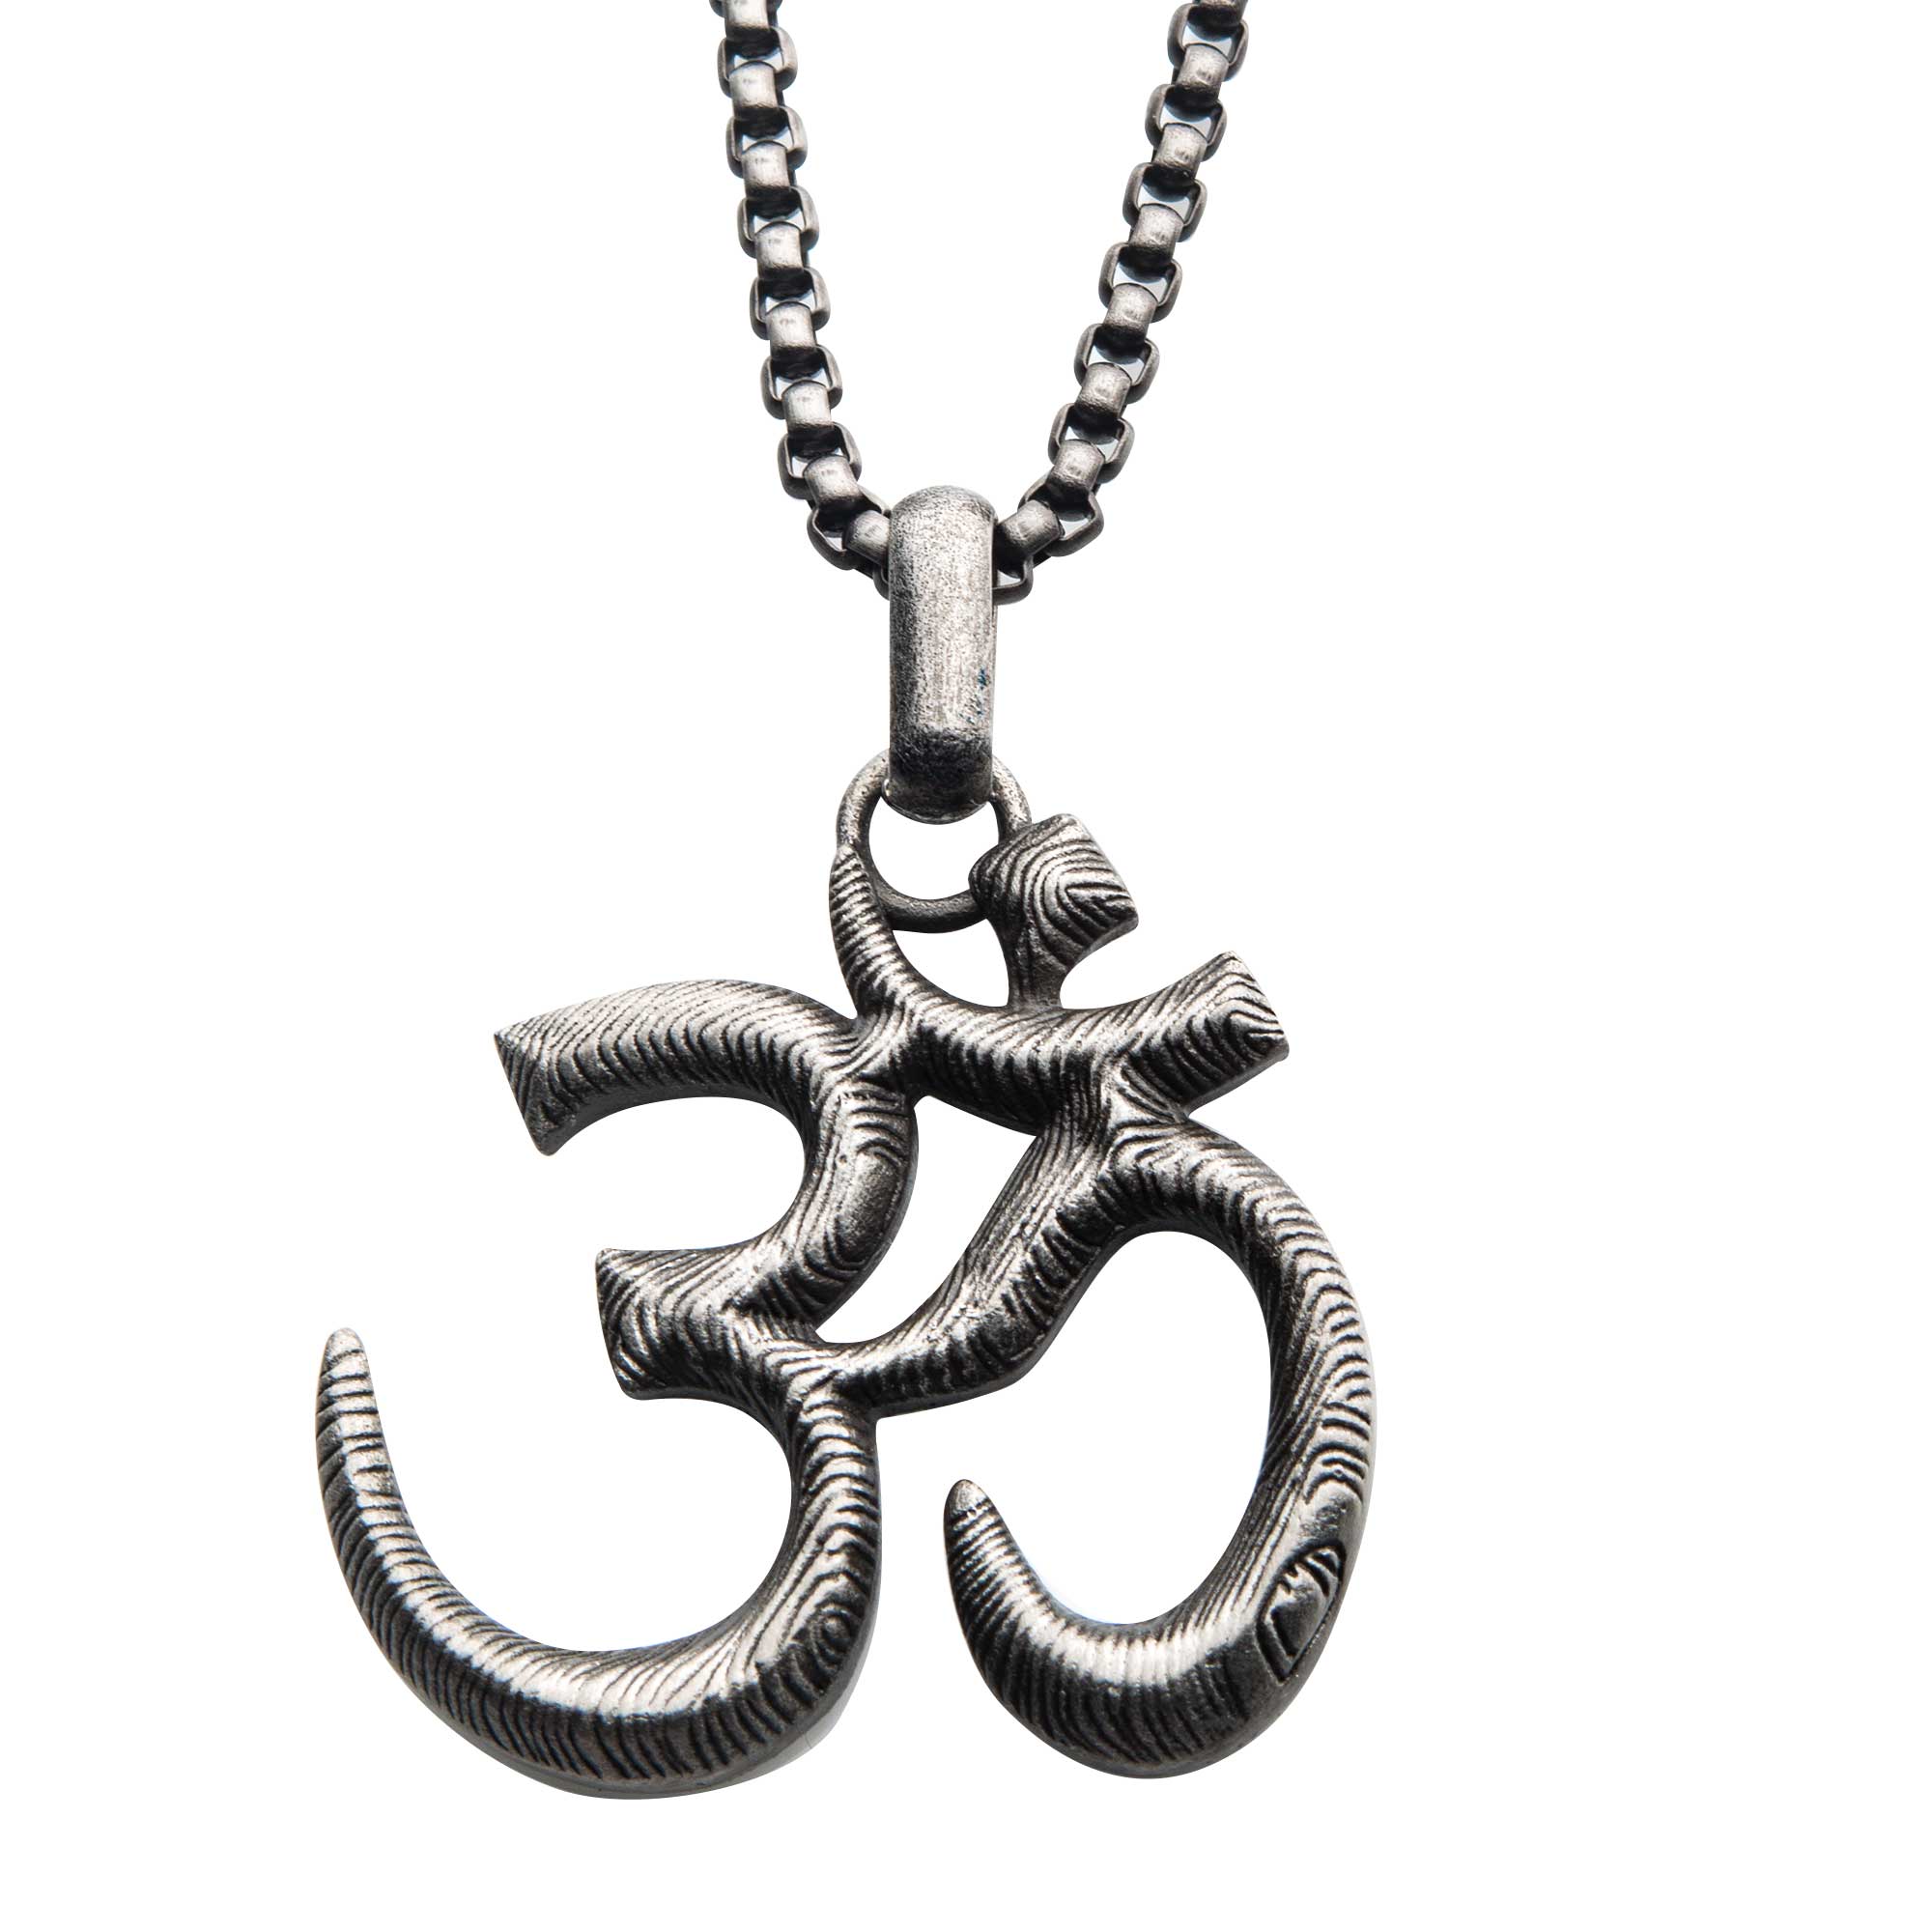 Stainless Steel with Antique Finish OM Symbol Pendant, with Steel Box Chain P.K. Bennett Jewelers Mundelein, IL